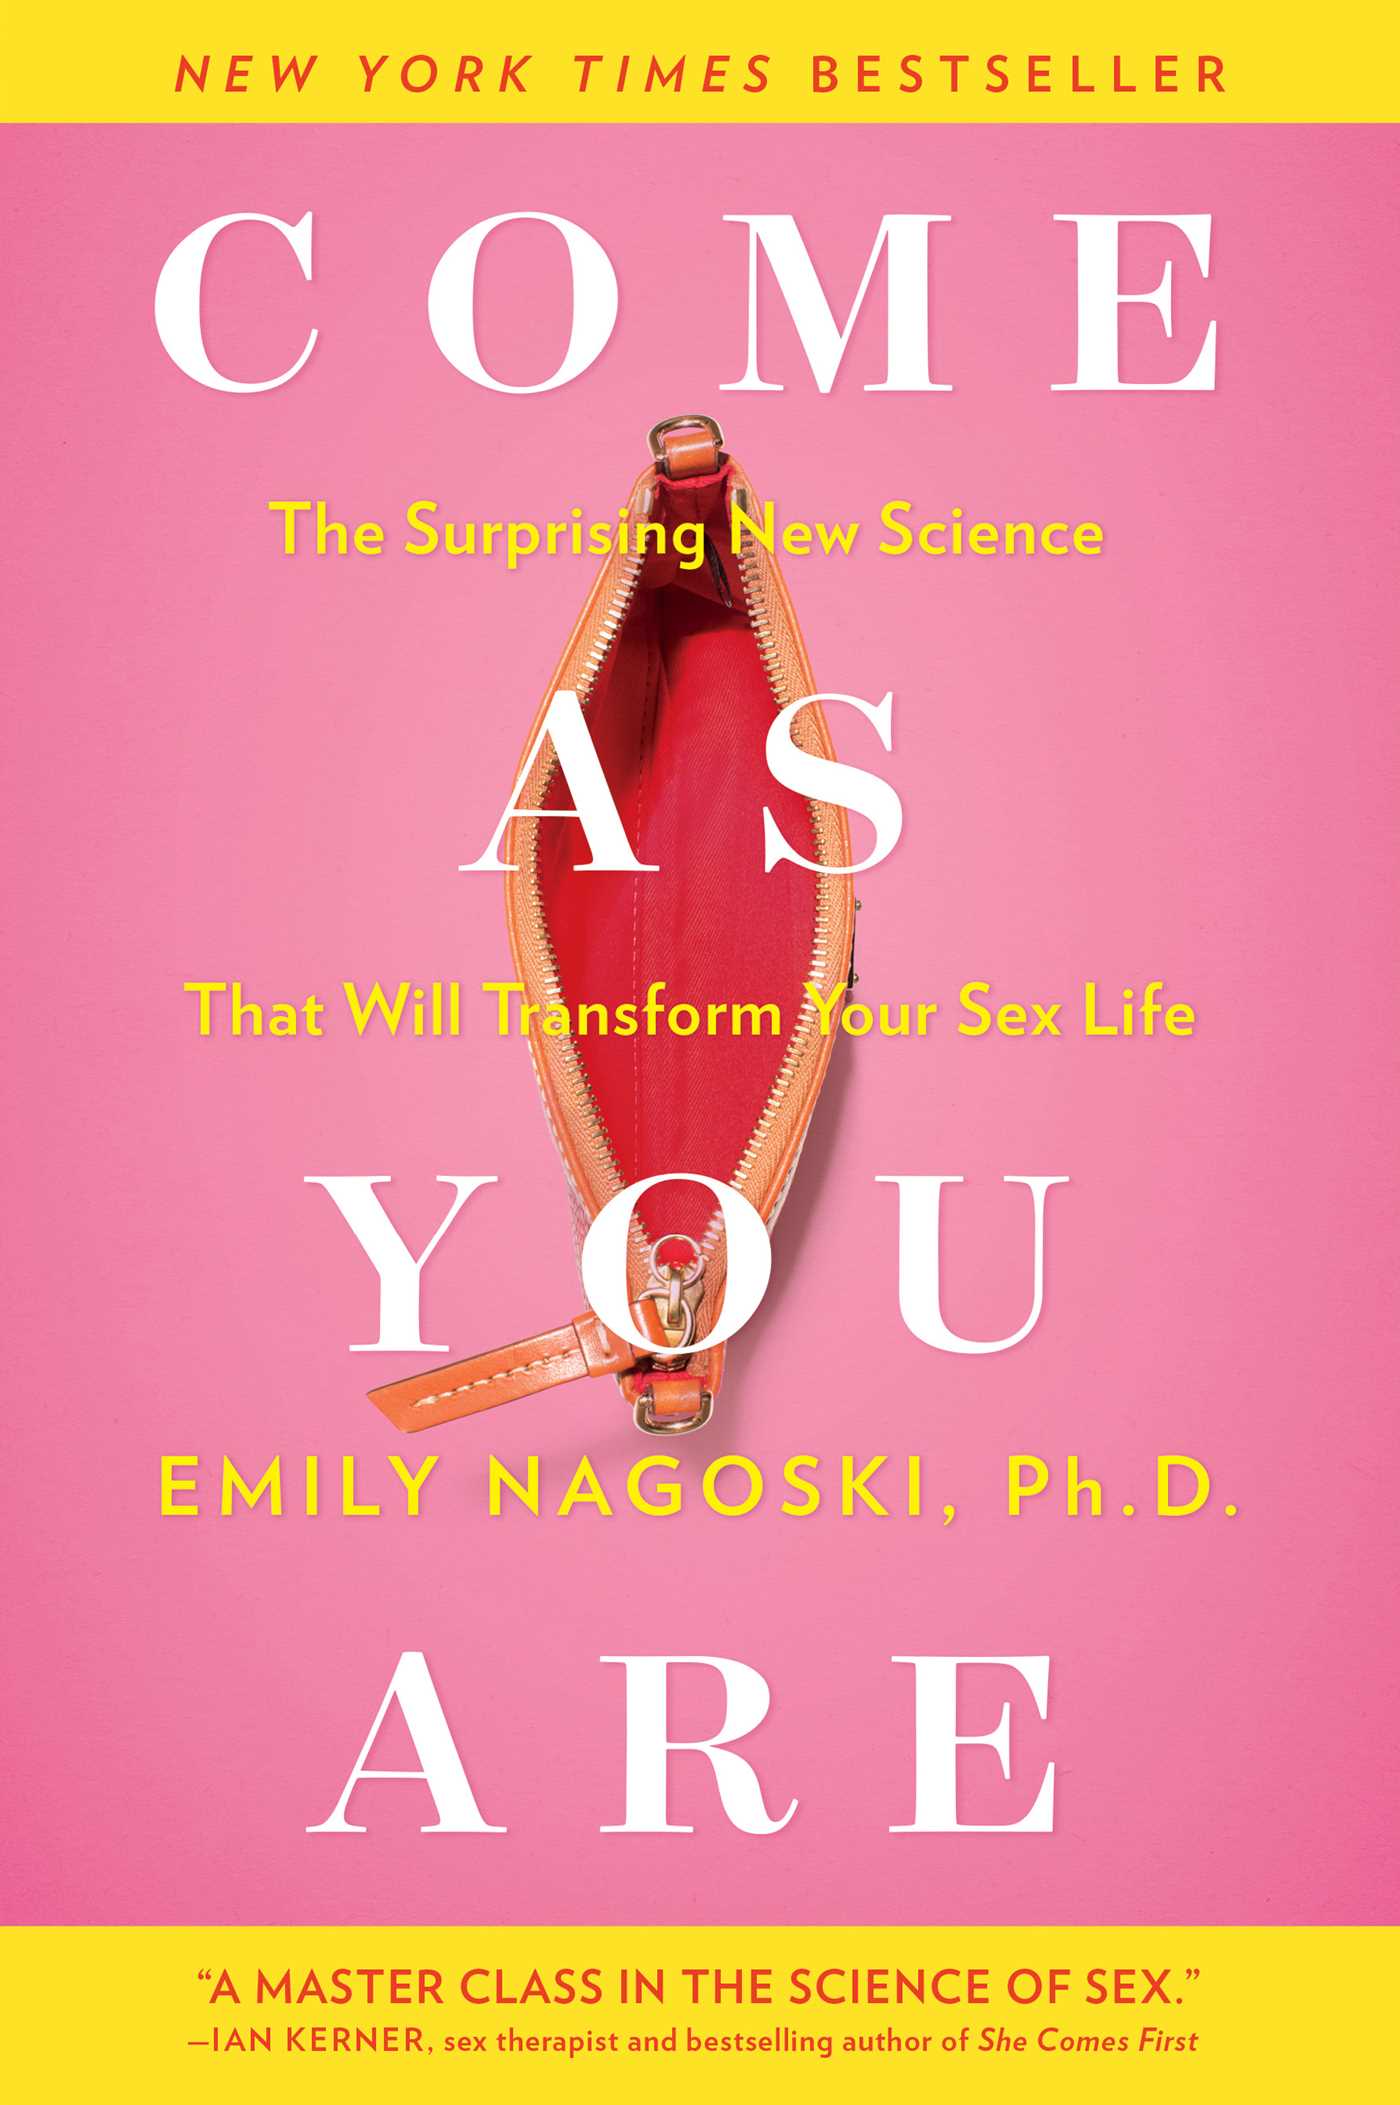 Cover Image of Come as You Are